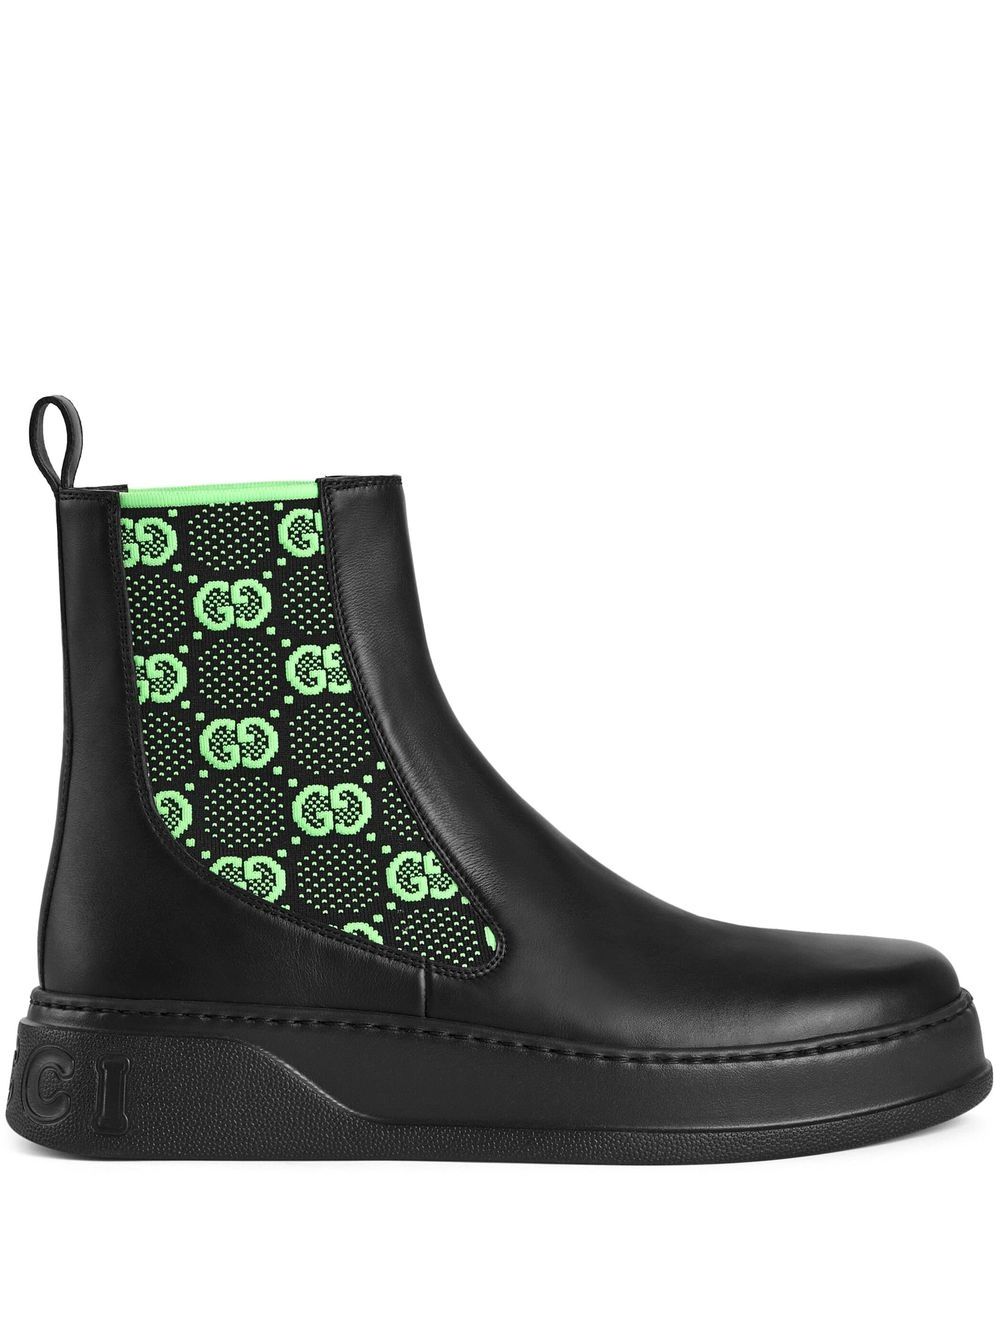 Image 1 of Gucci GG Supreme ankle boots